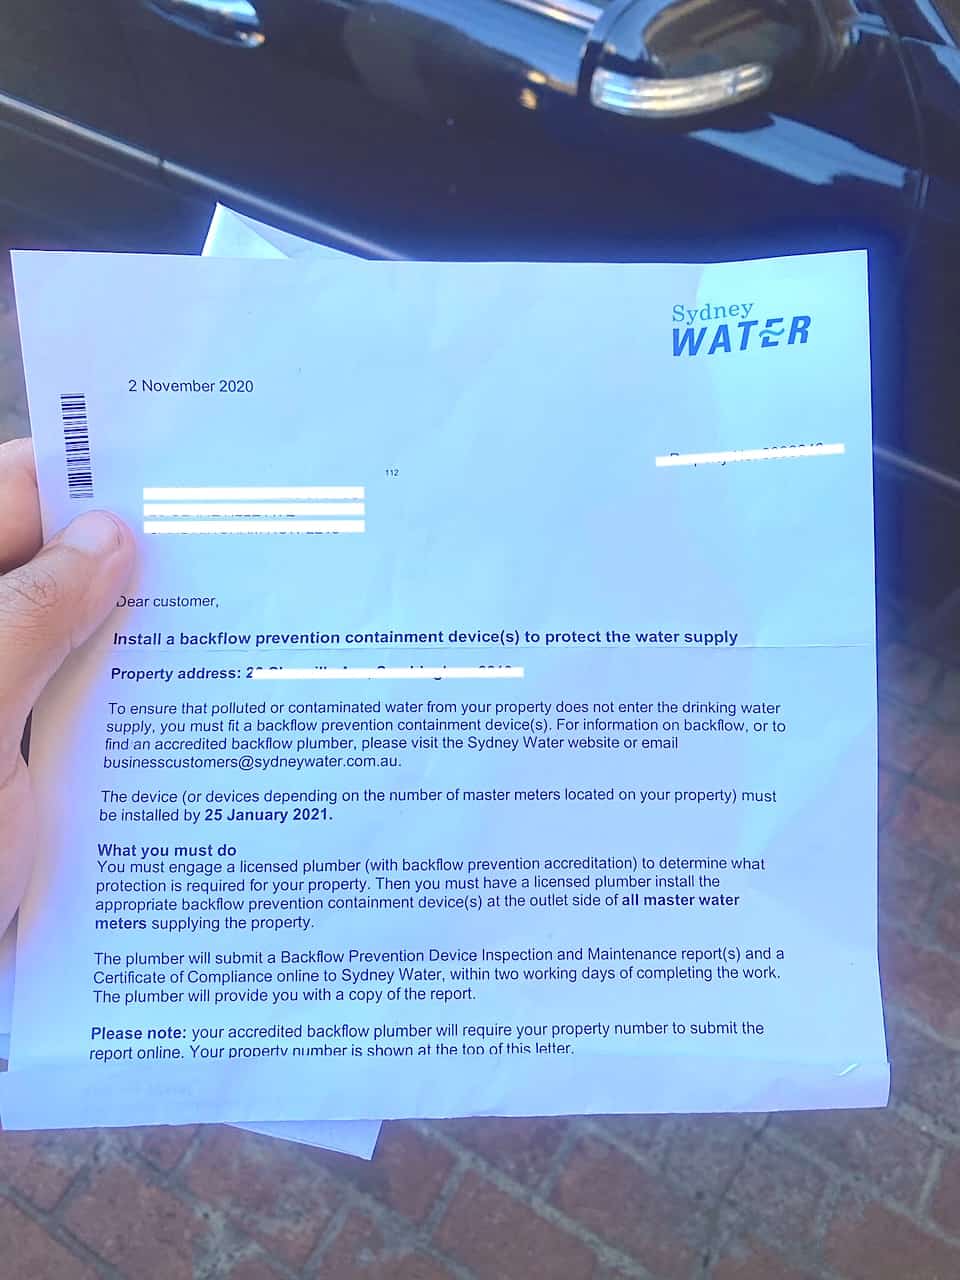 Sydney Water Install a Backflow Prevention Containment Device Request Letter